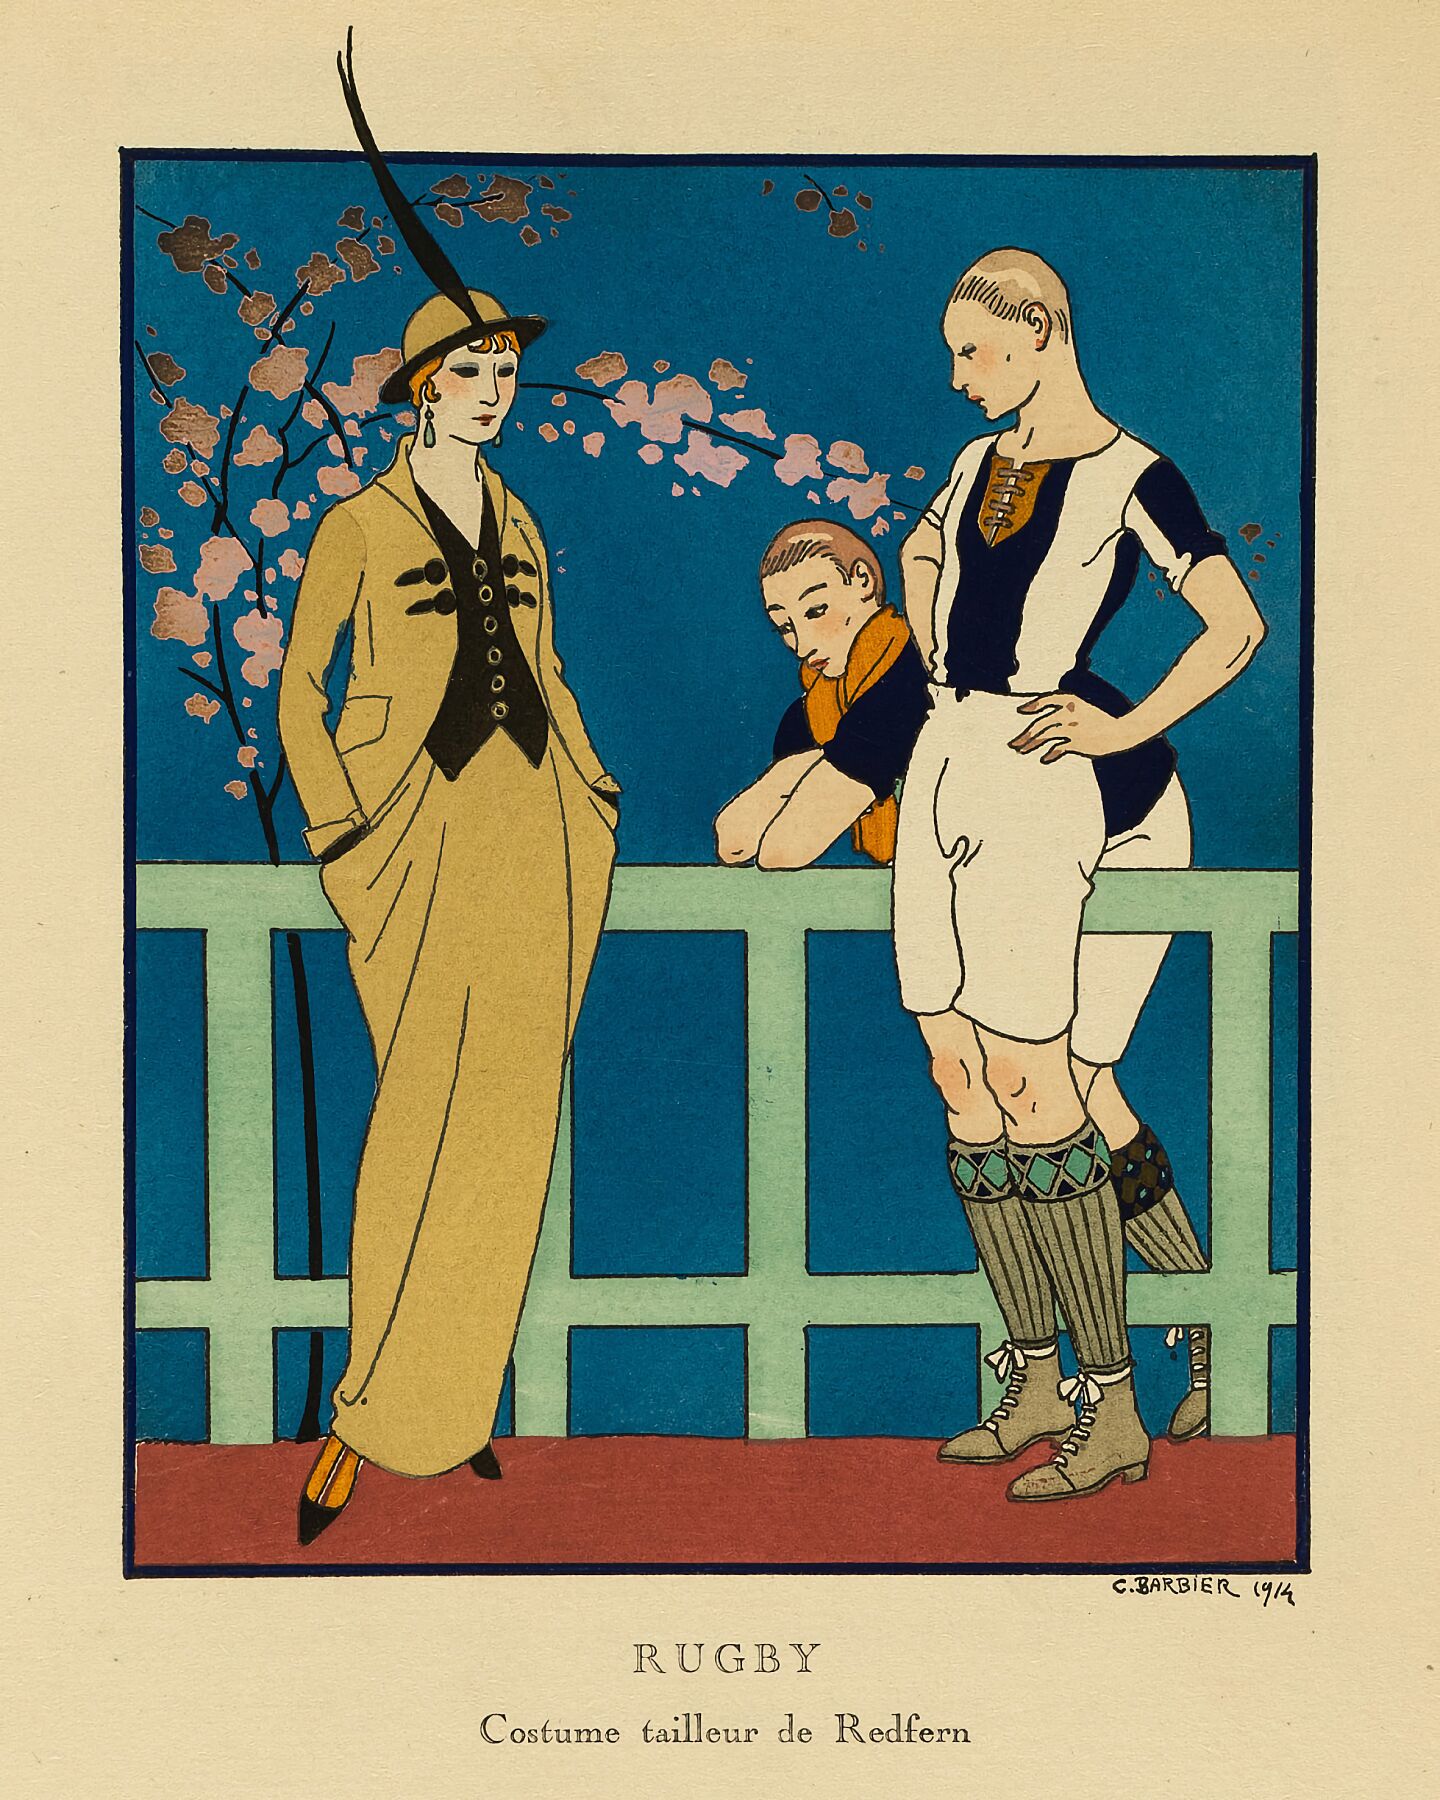 Rugby Costume Tailleur de Redfern by George Barbier - 1914